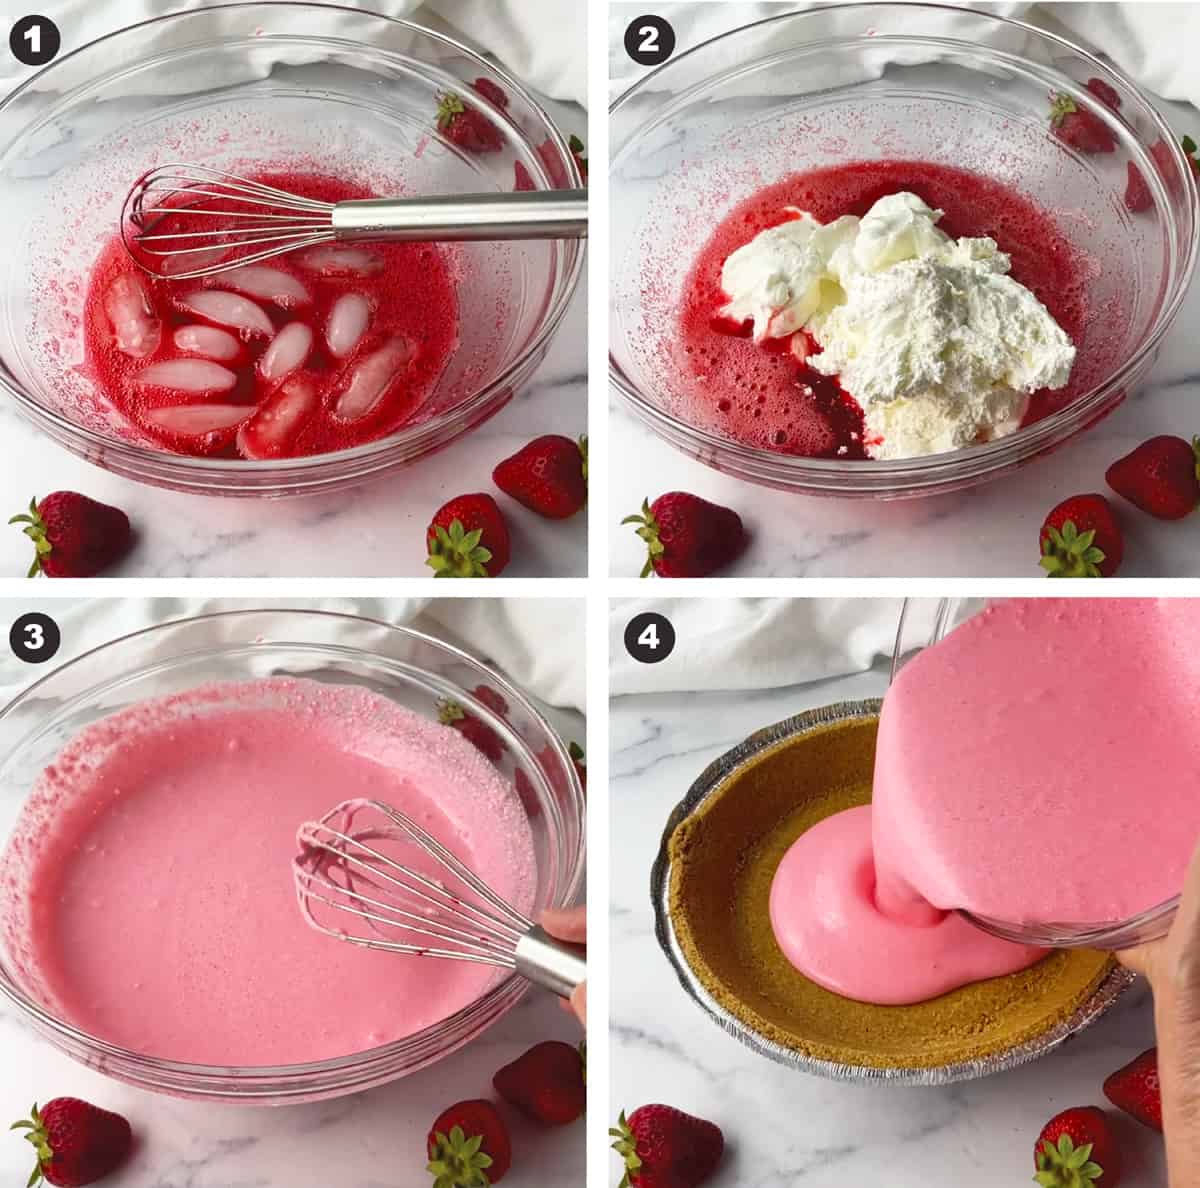 Four photos showing the steps to making an easy strawberry cool whip no-bake pie.